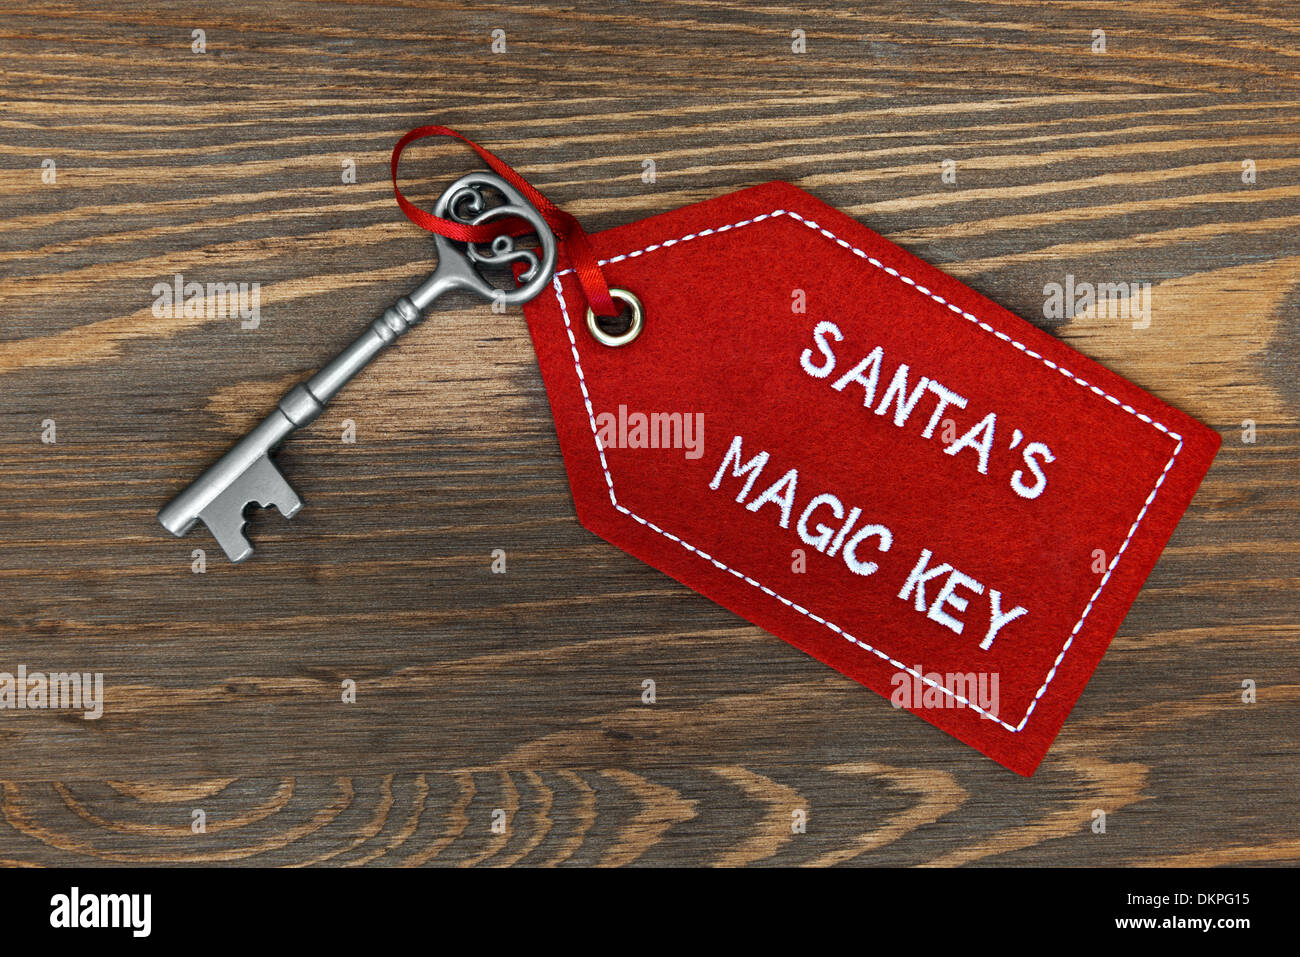 Santa's magic key on a rustic wooden background. Stock Photo